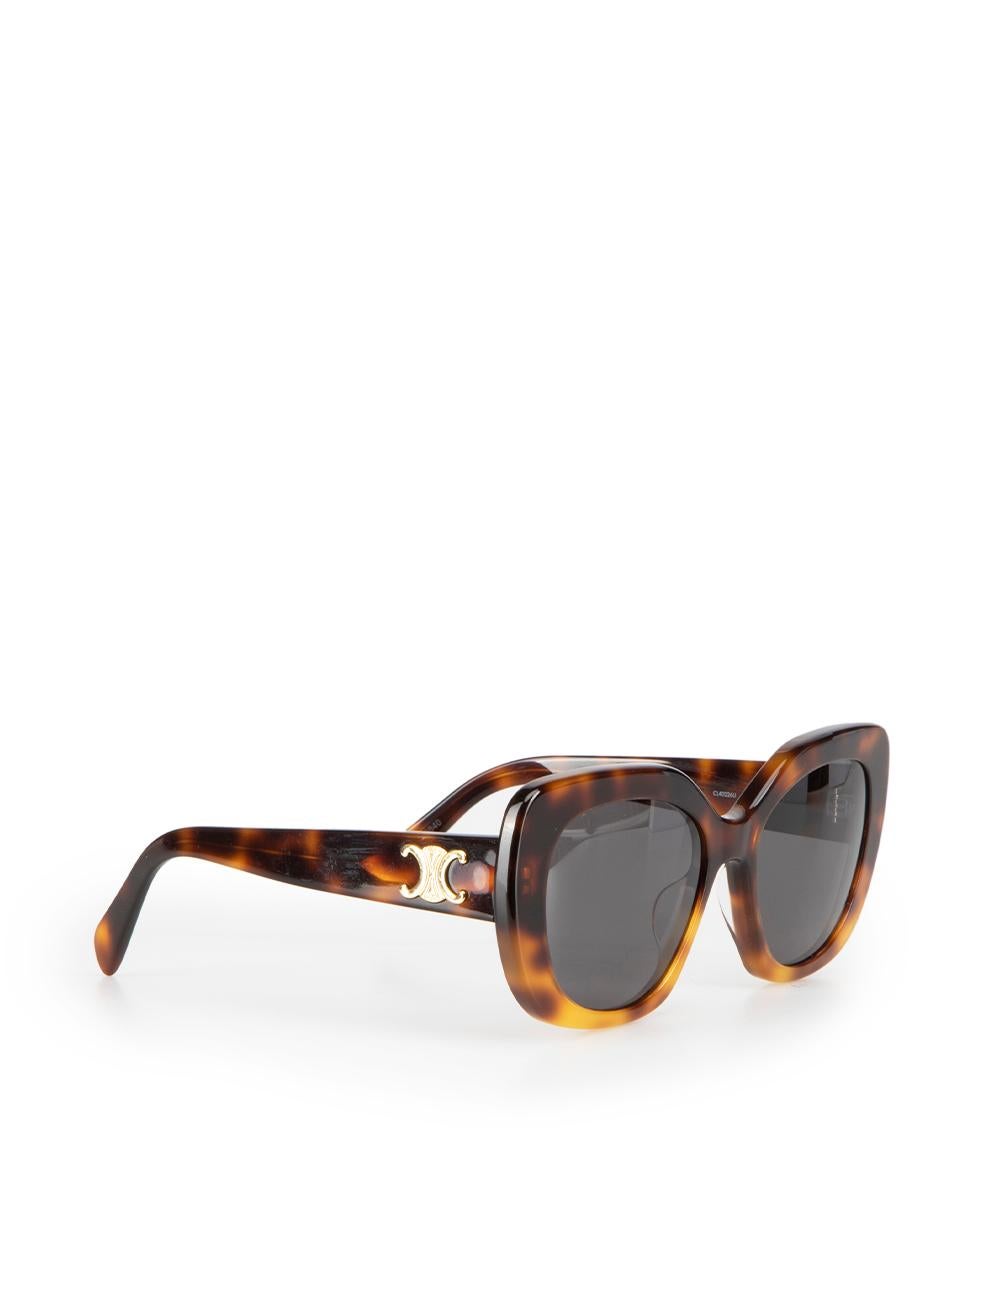 CONDITION is Very good. Hardly any visible wear to sunglasses is evident on this used Céline designer resale item. These sunglasses come with original case.



Details


Brown

Plastic

Oversized square sunglasses

Tortoiseshell pattern

Black